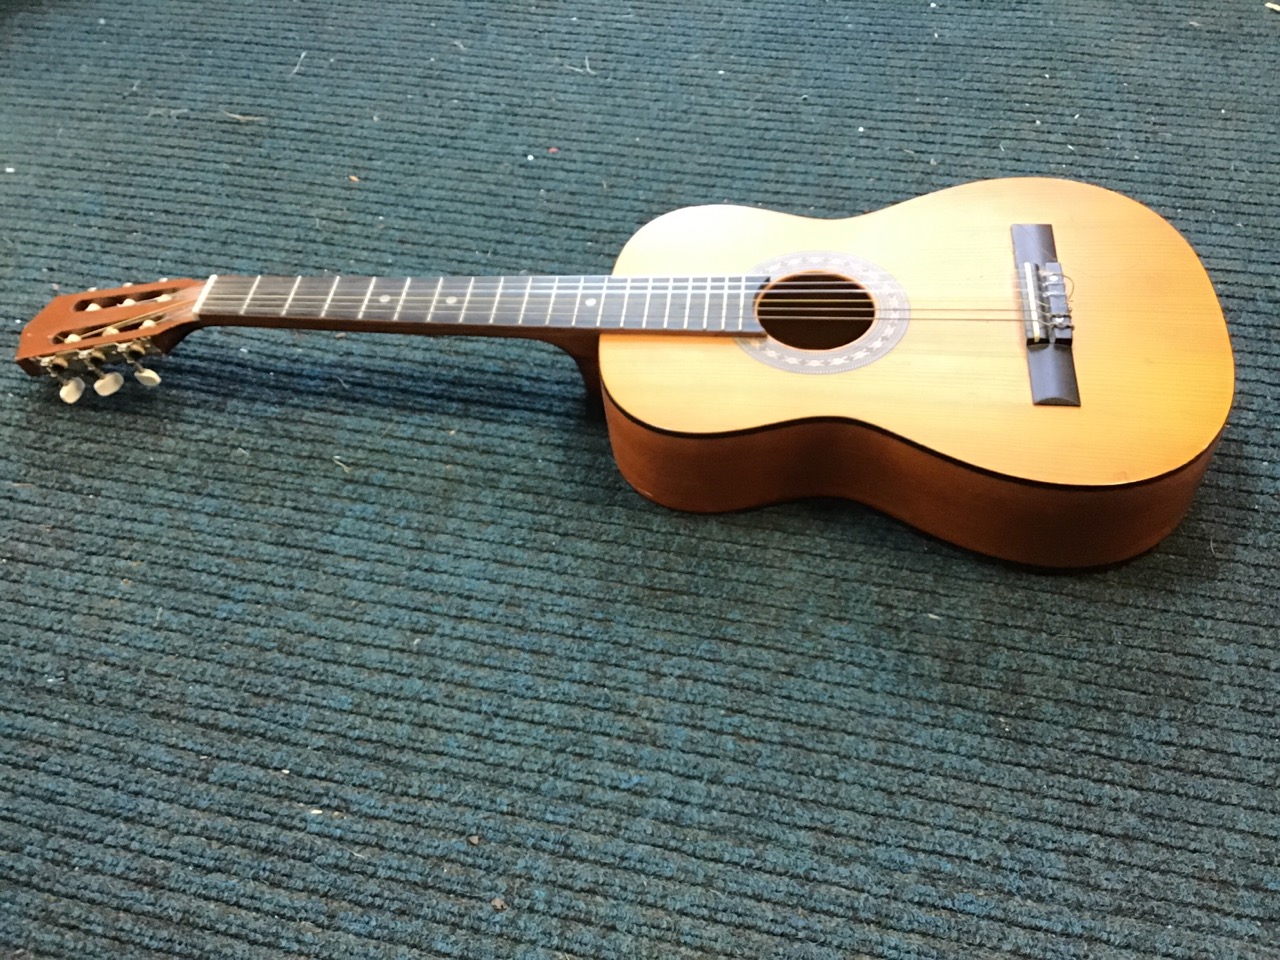 A Romanian nylon strung classical guitar by Encore - model ENC36N, with mosaic style decoration to - Bild 3 aus 3